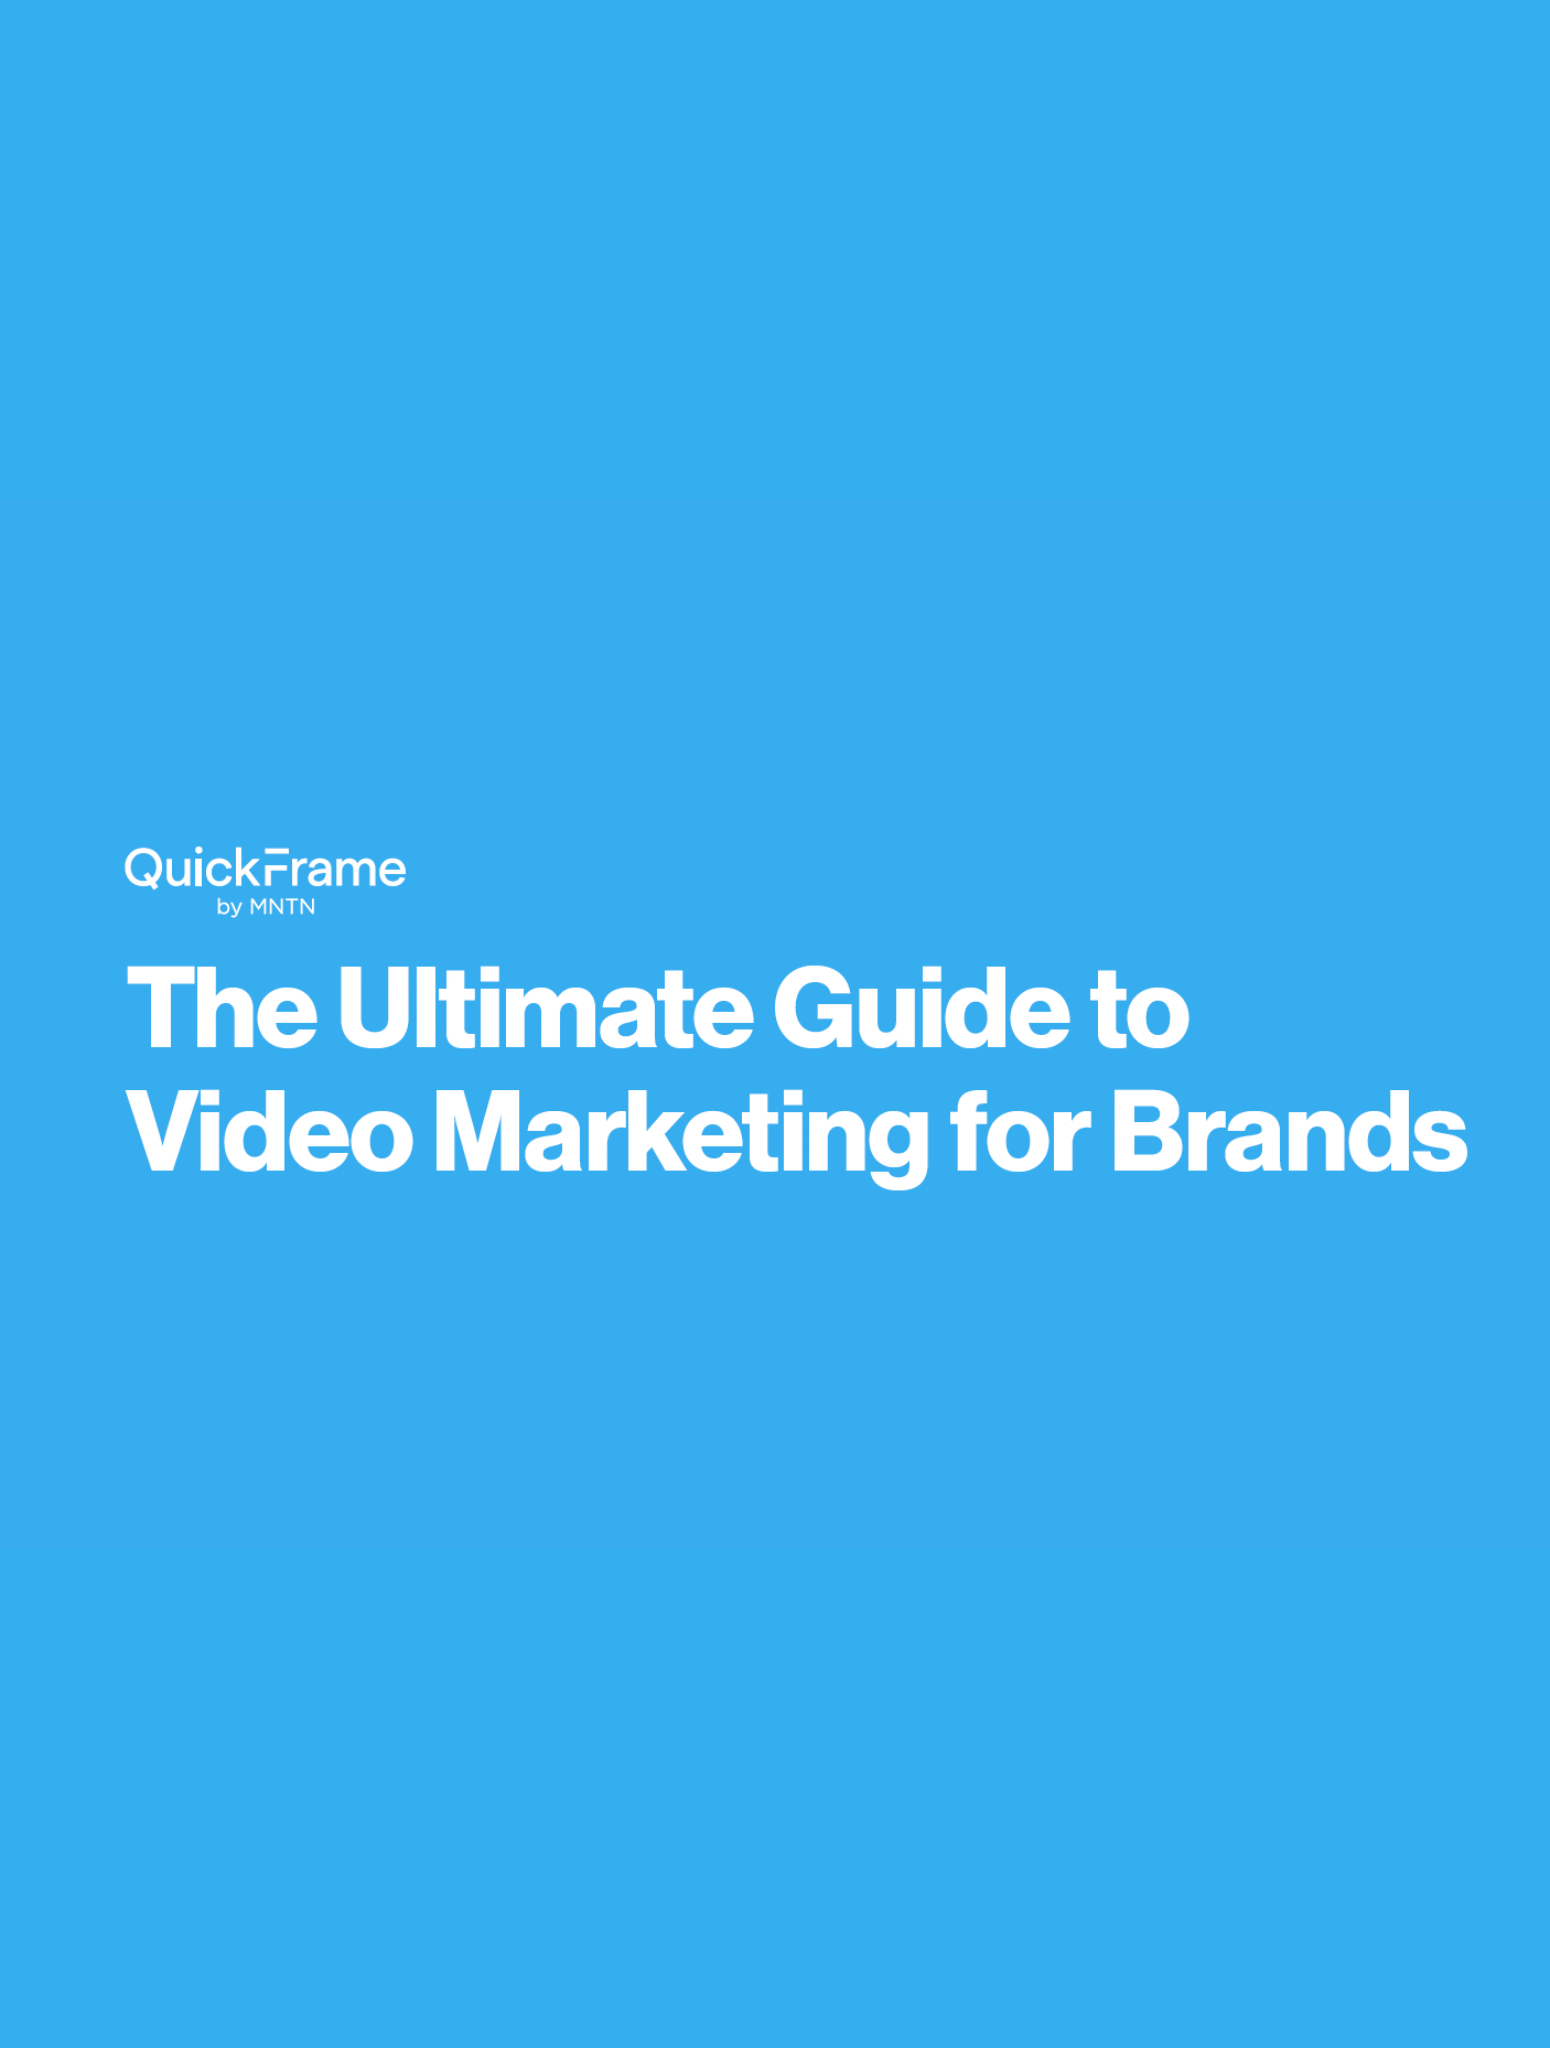 The Ultimate Guide to Video Marketing for Brands